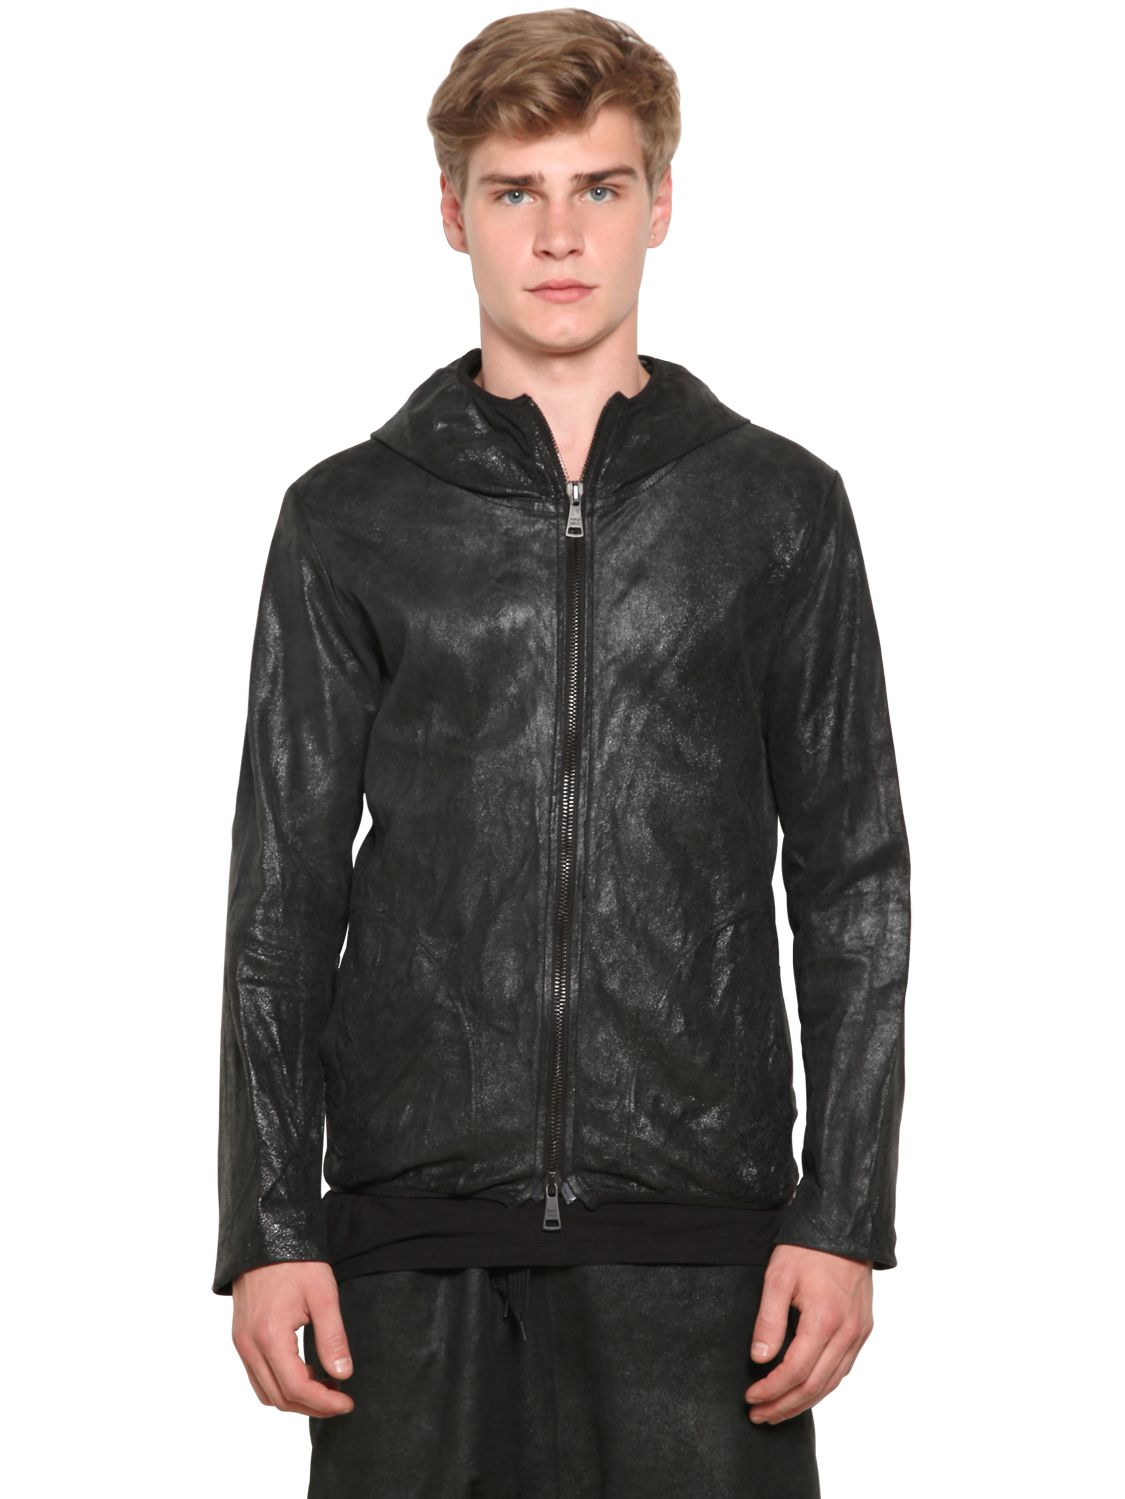 Lyst - Giorgio Brato Waxed and Washed Hooded Leather Jacket in Black ...